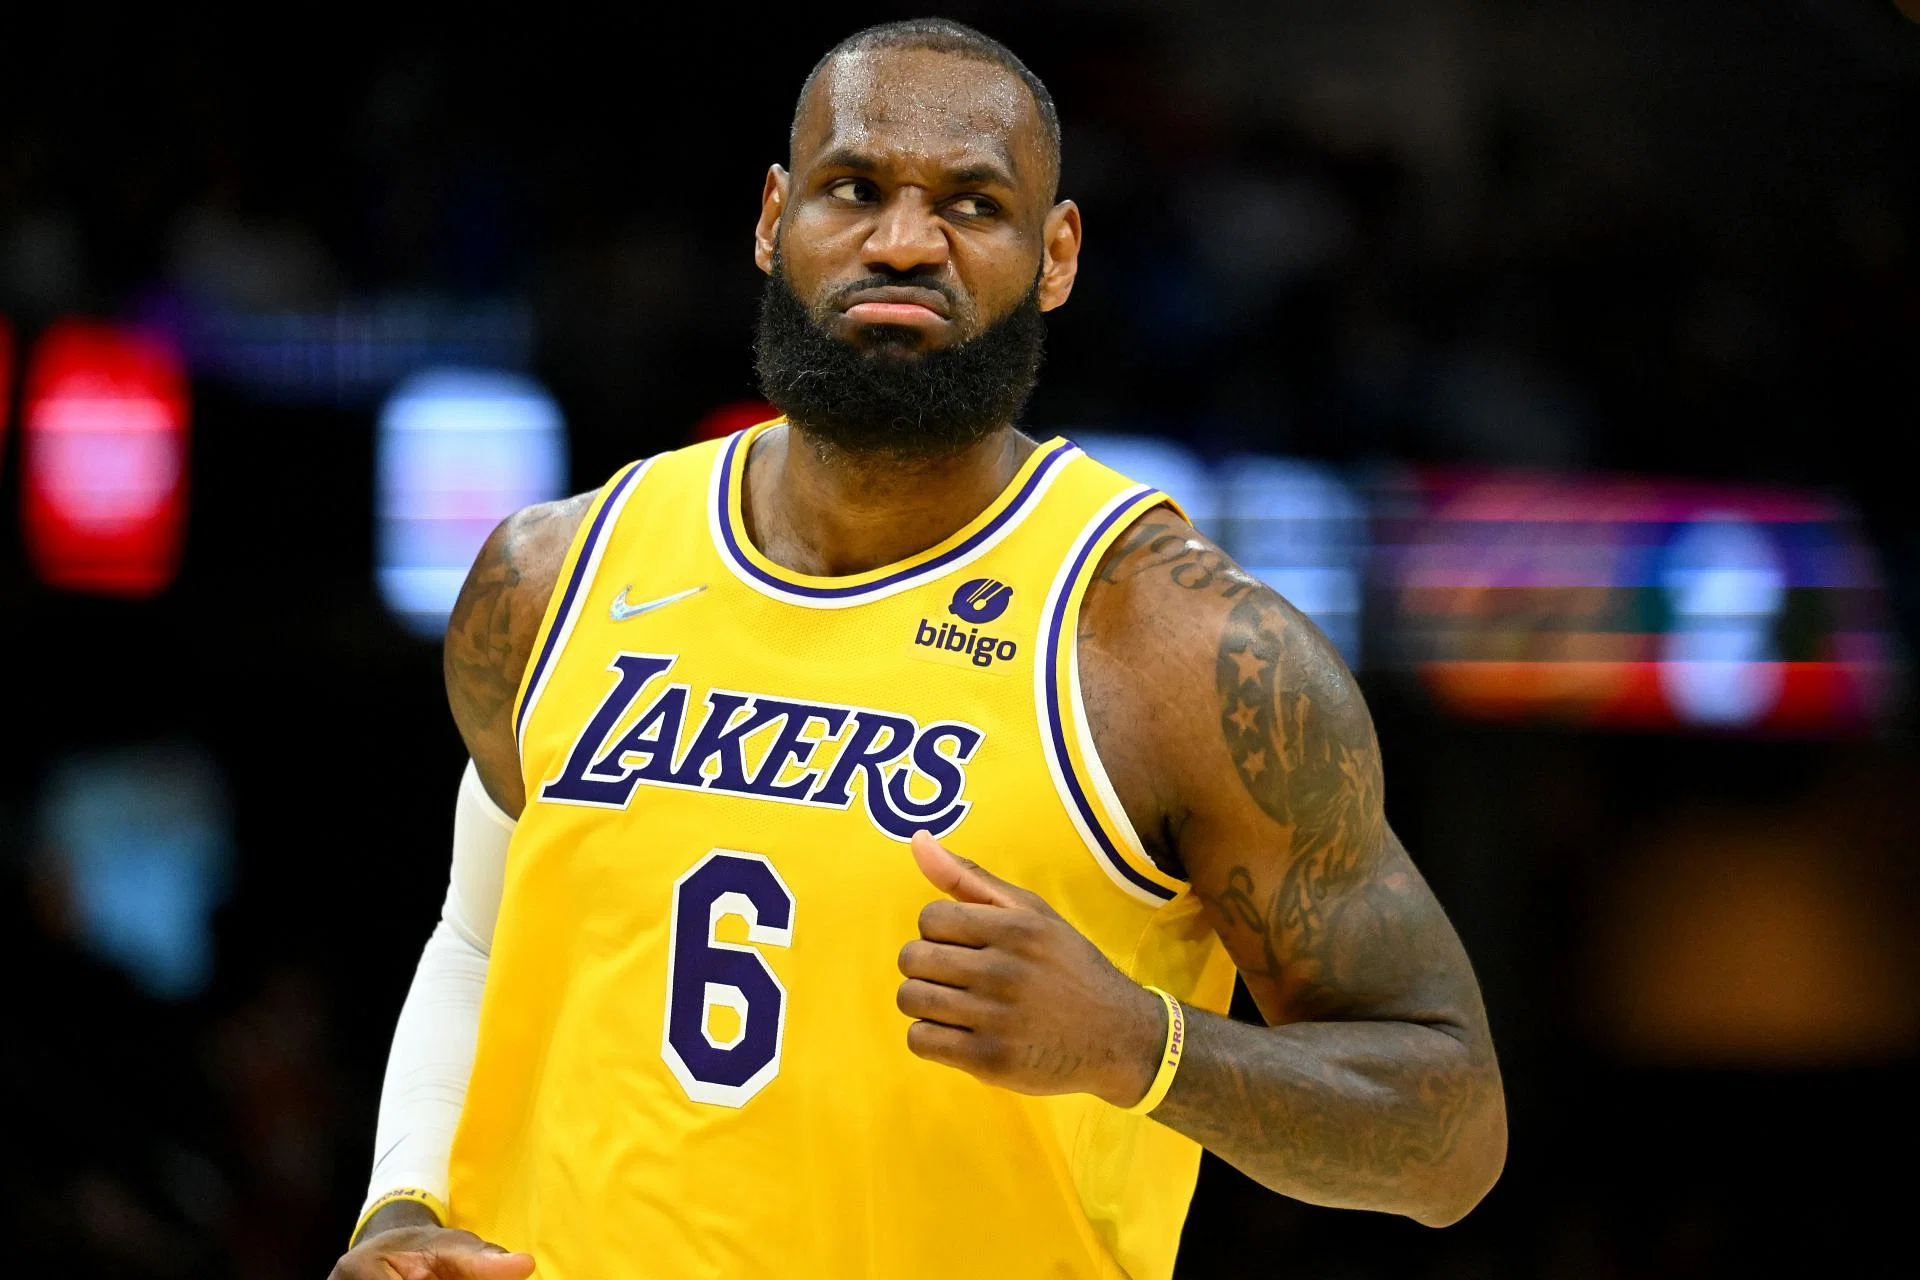 LeBron's Big Decision: Will He Stay with the Lakers for More Championships?